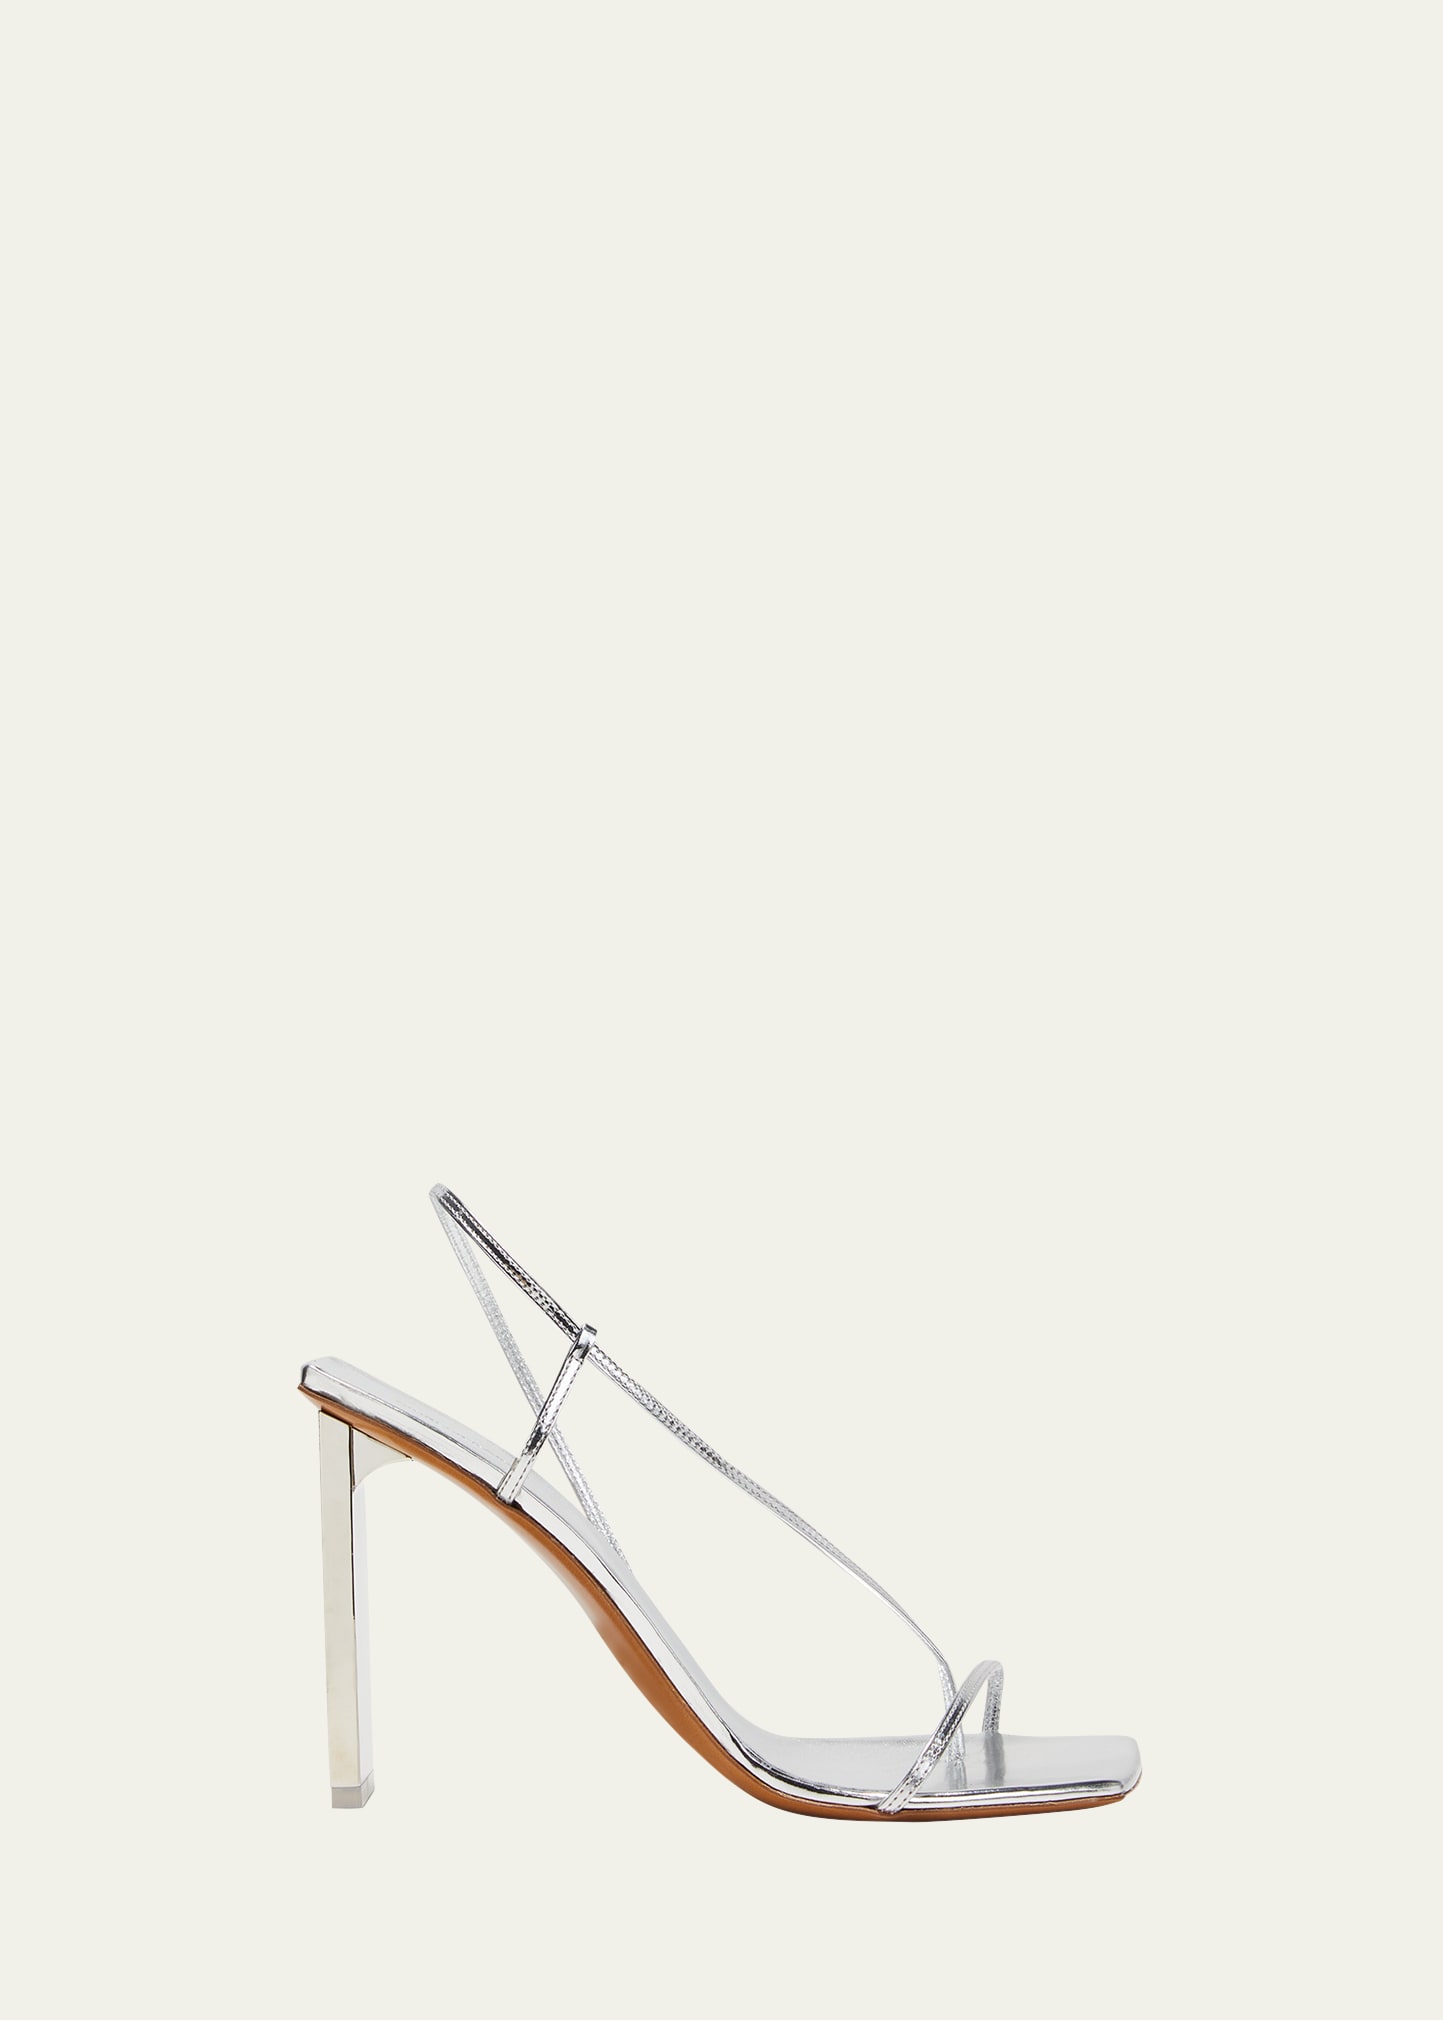 Arielle Baron Narcissus Metallic Slingback Sandals In Silver